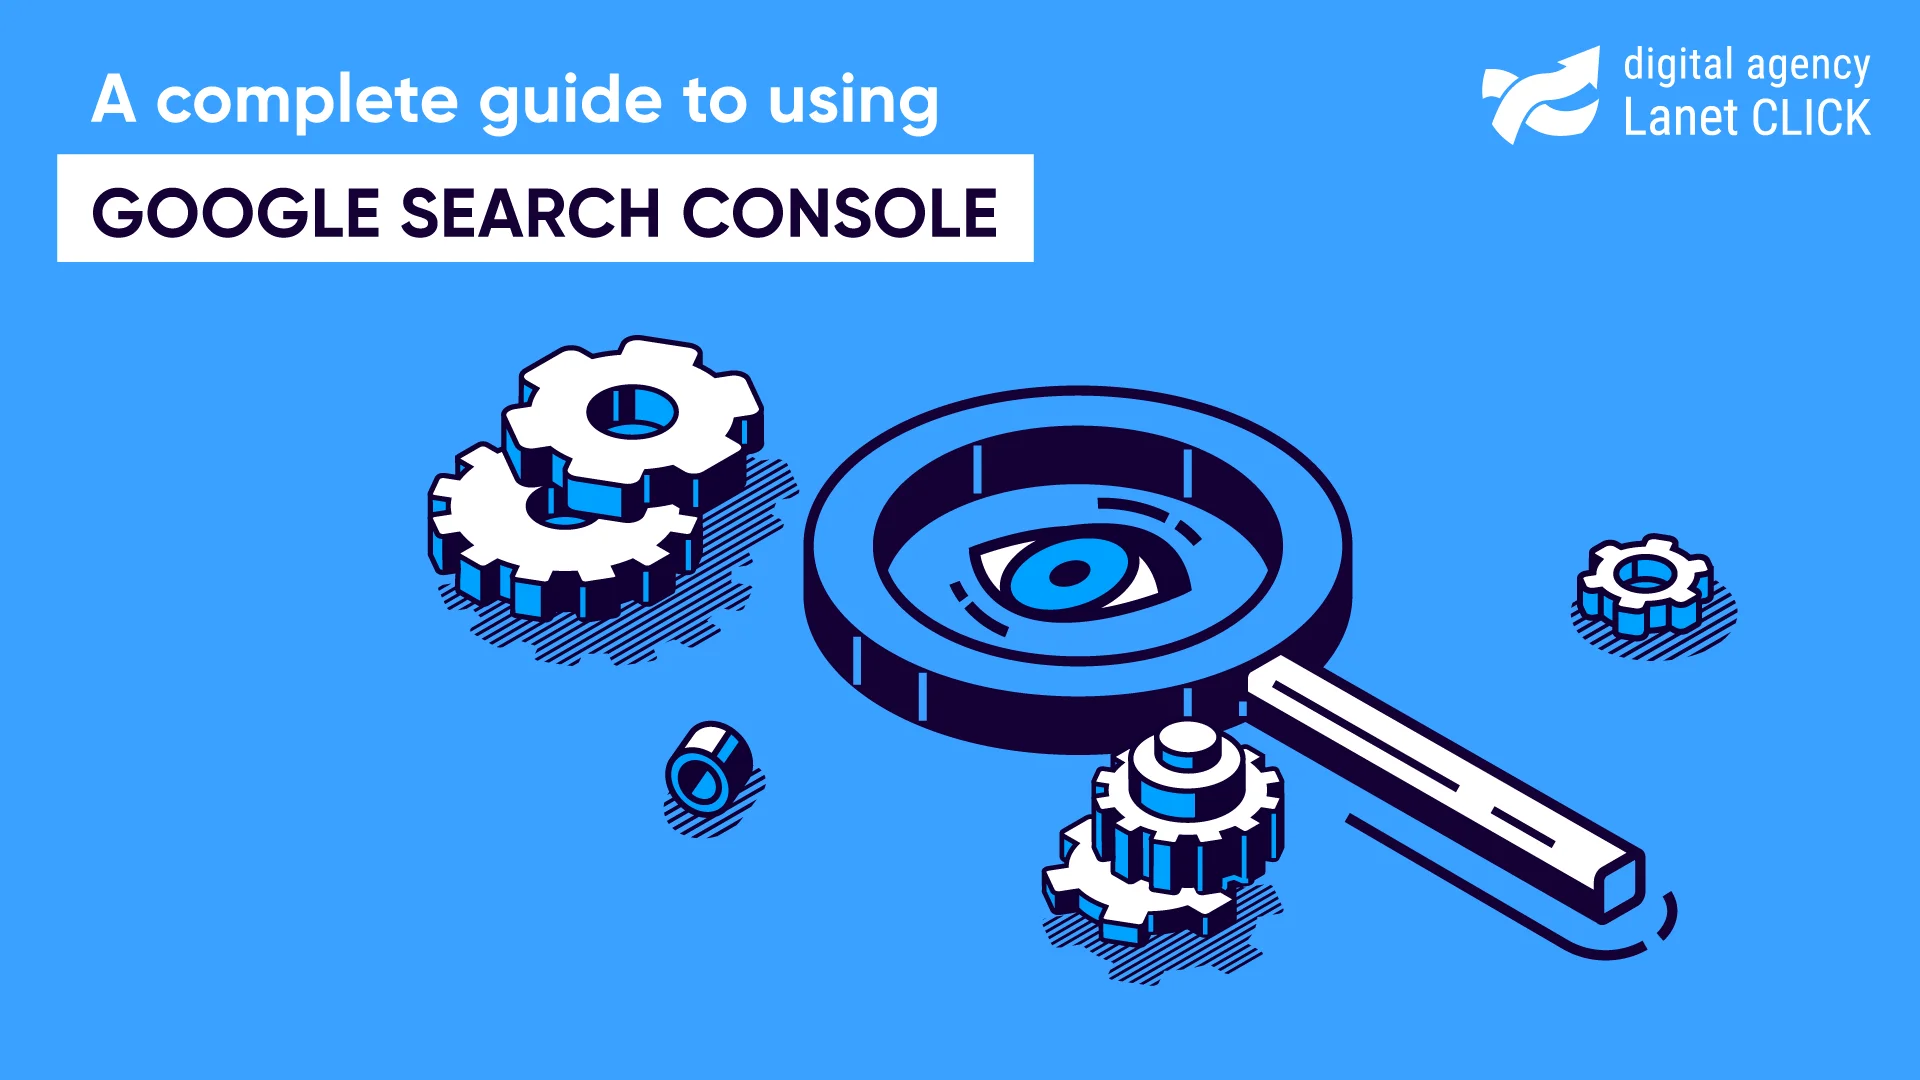 A complete guide to using Google Search Console